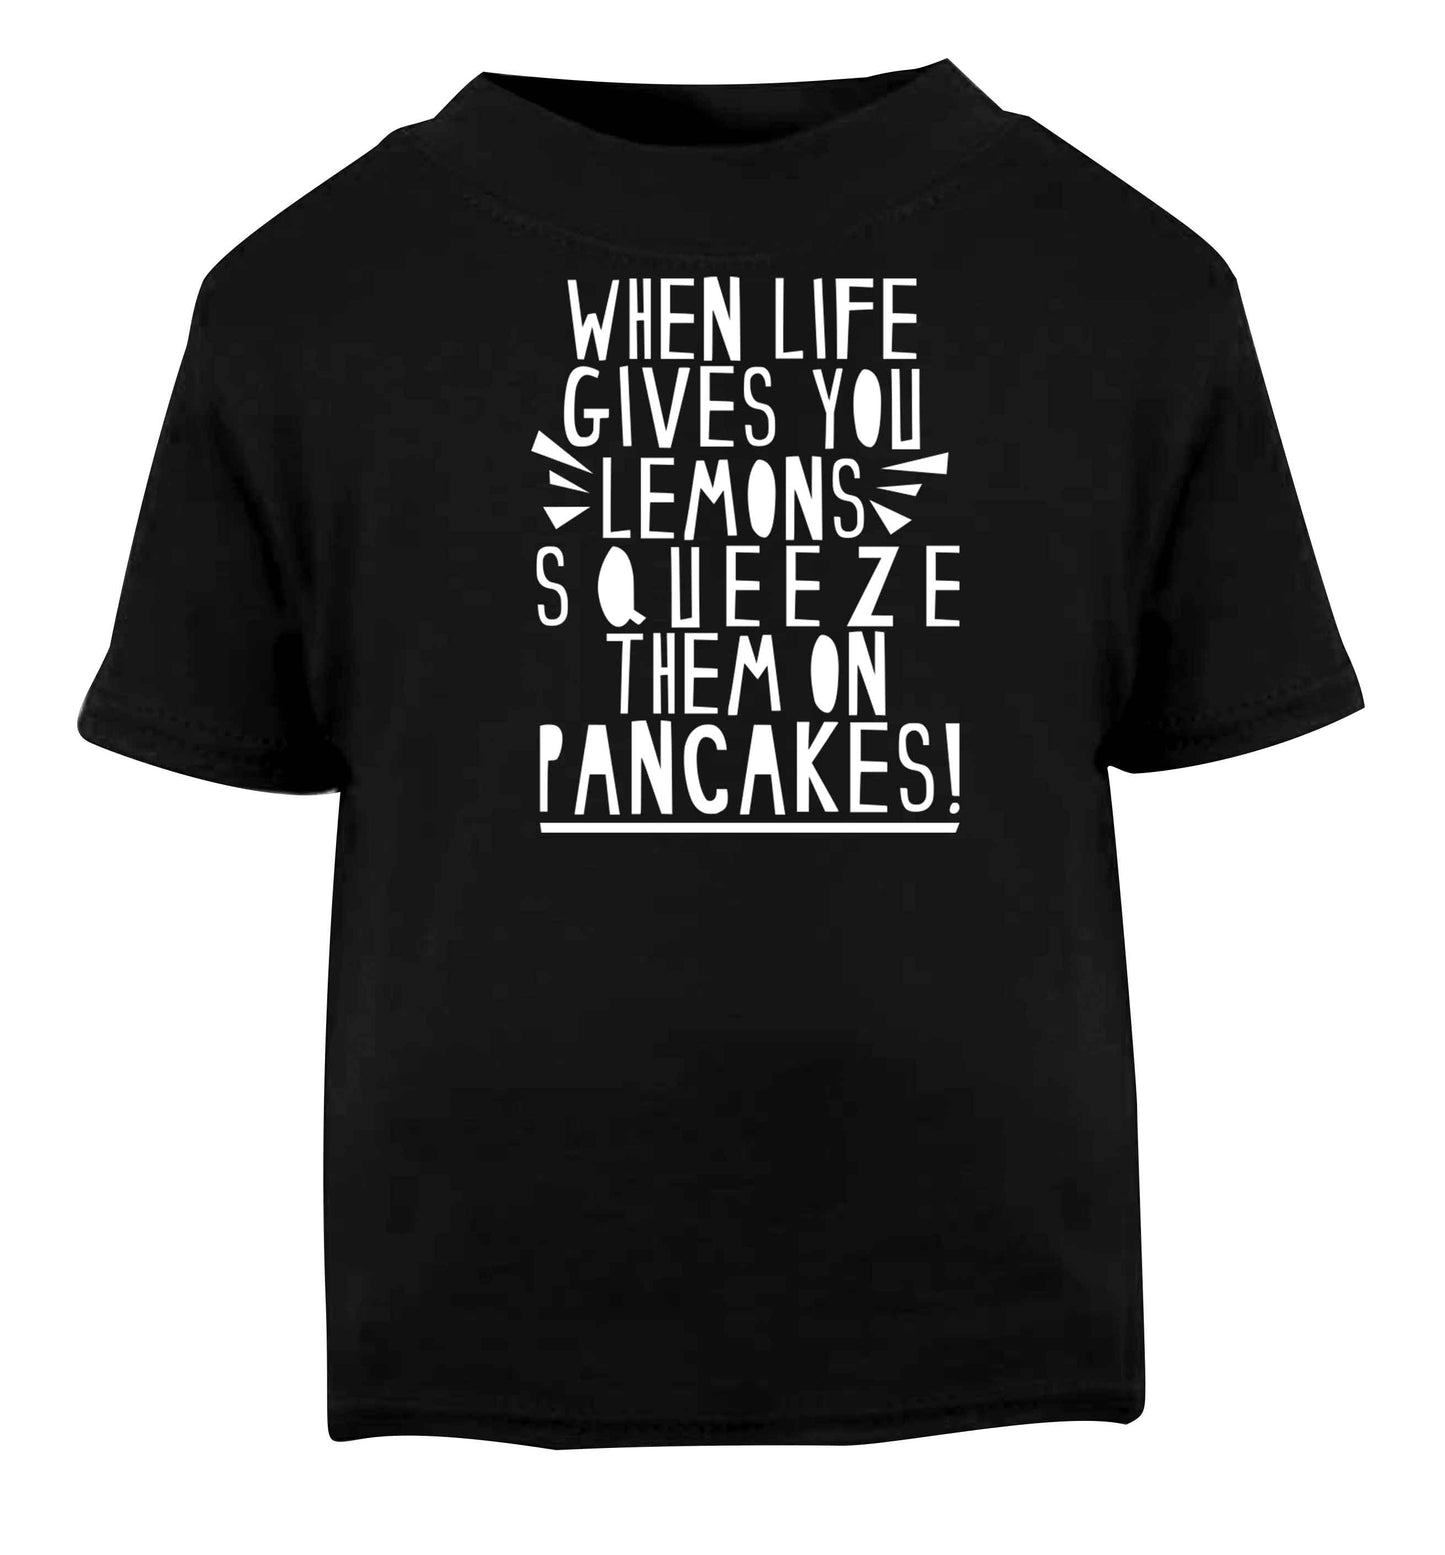 When life gives you lemons squeeze them on pancakes! Black baby toddler Tshirt 2 years